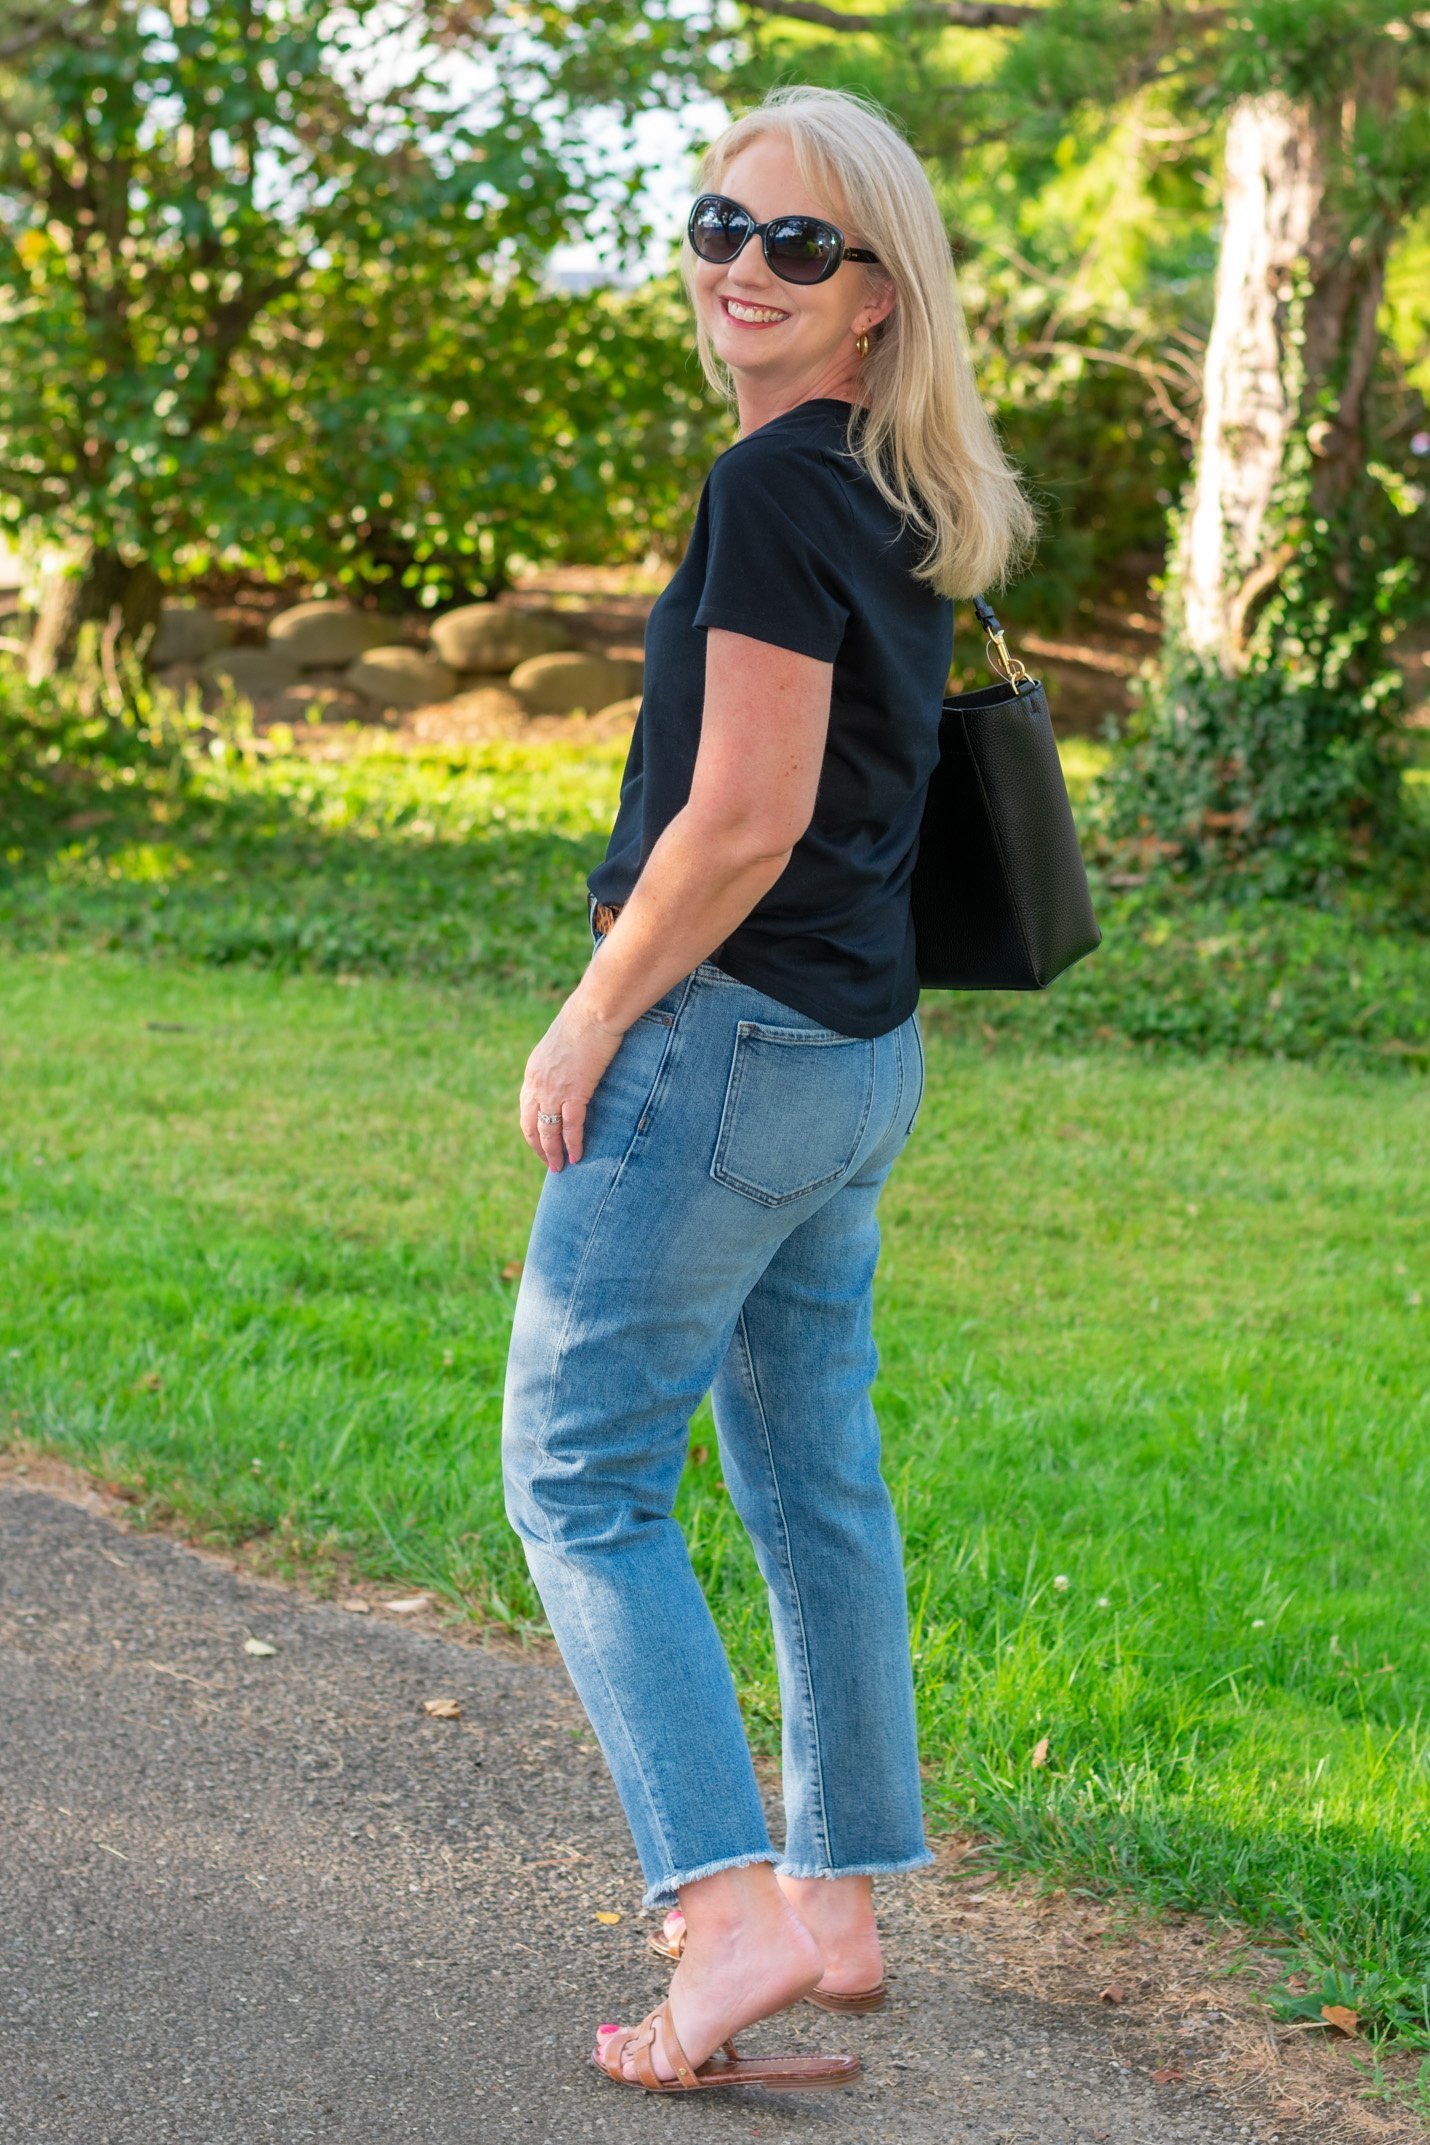 Transition Into Fall with a Black Tee and Blue Jeans - Dressed for My Day